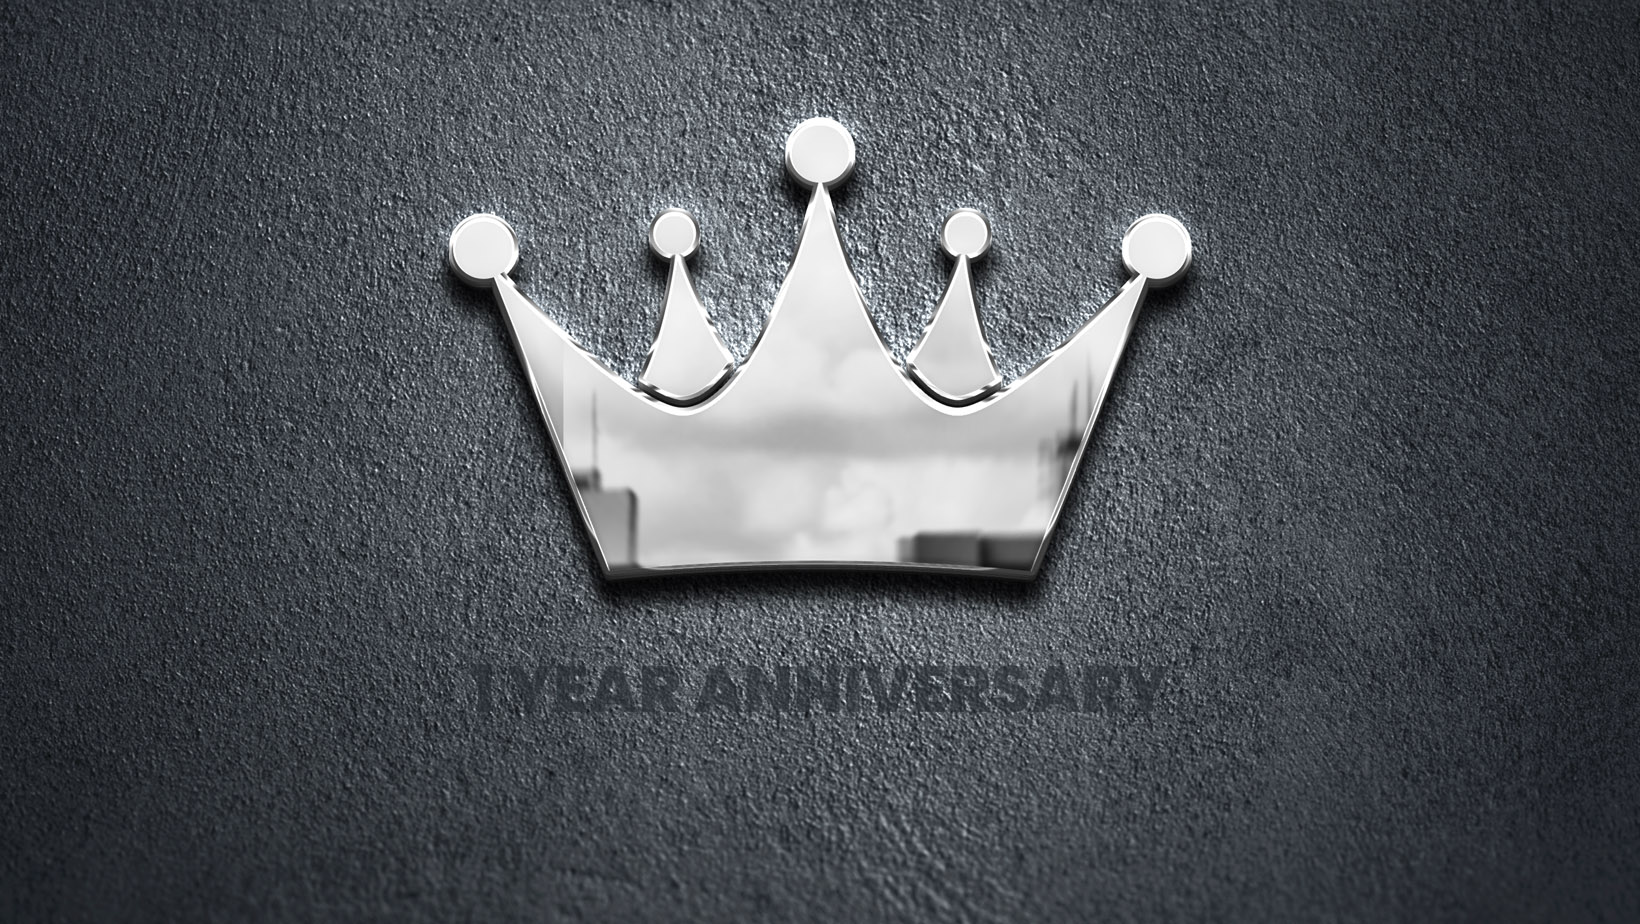 One year of CROWN